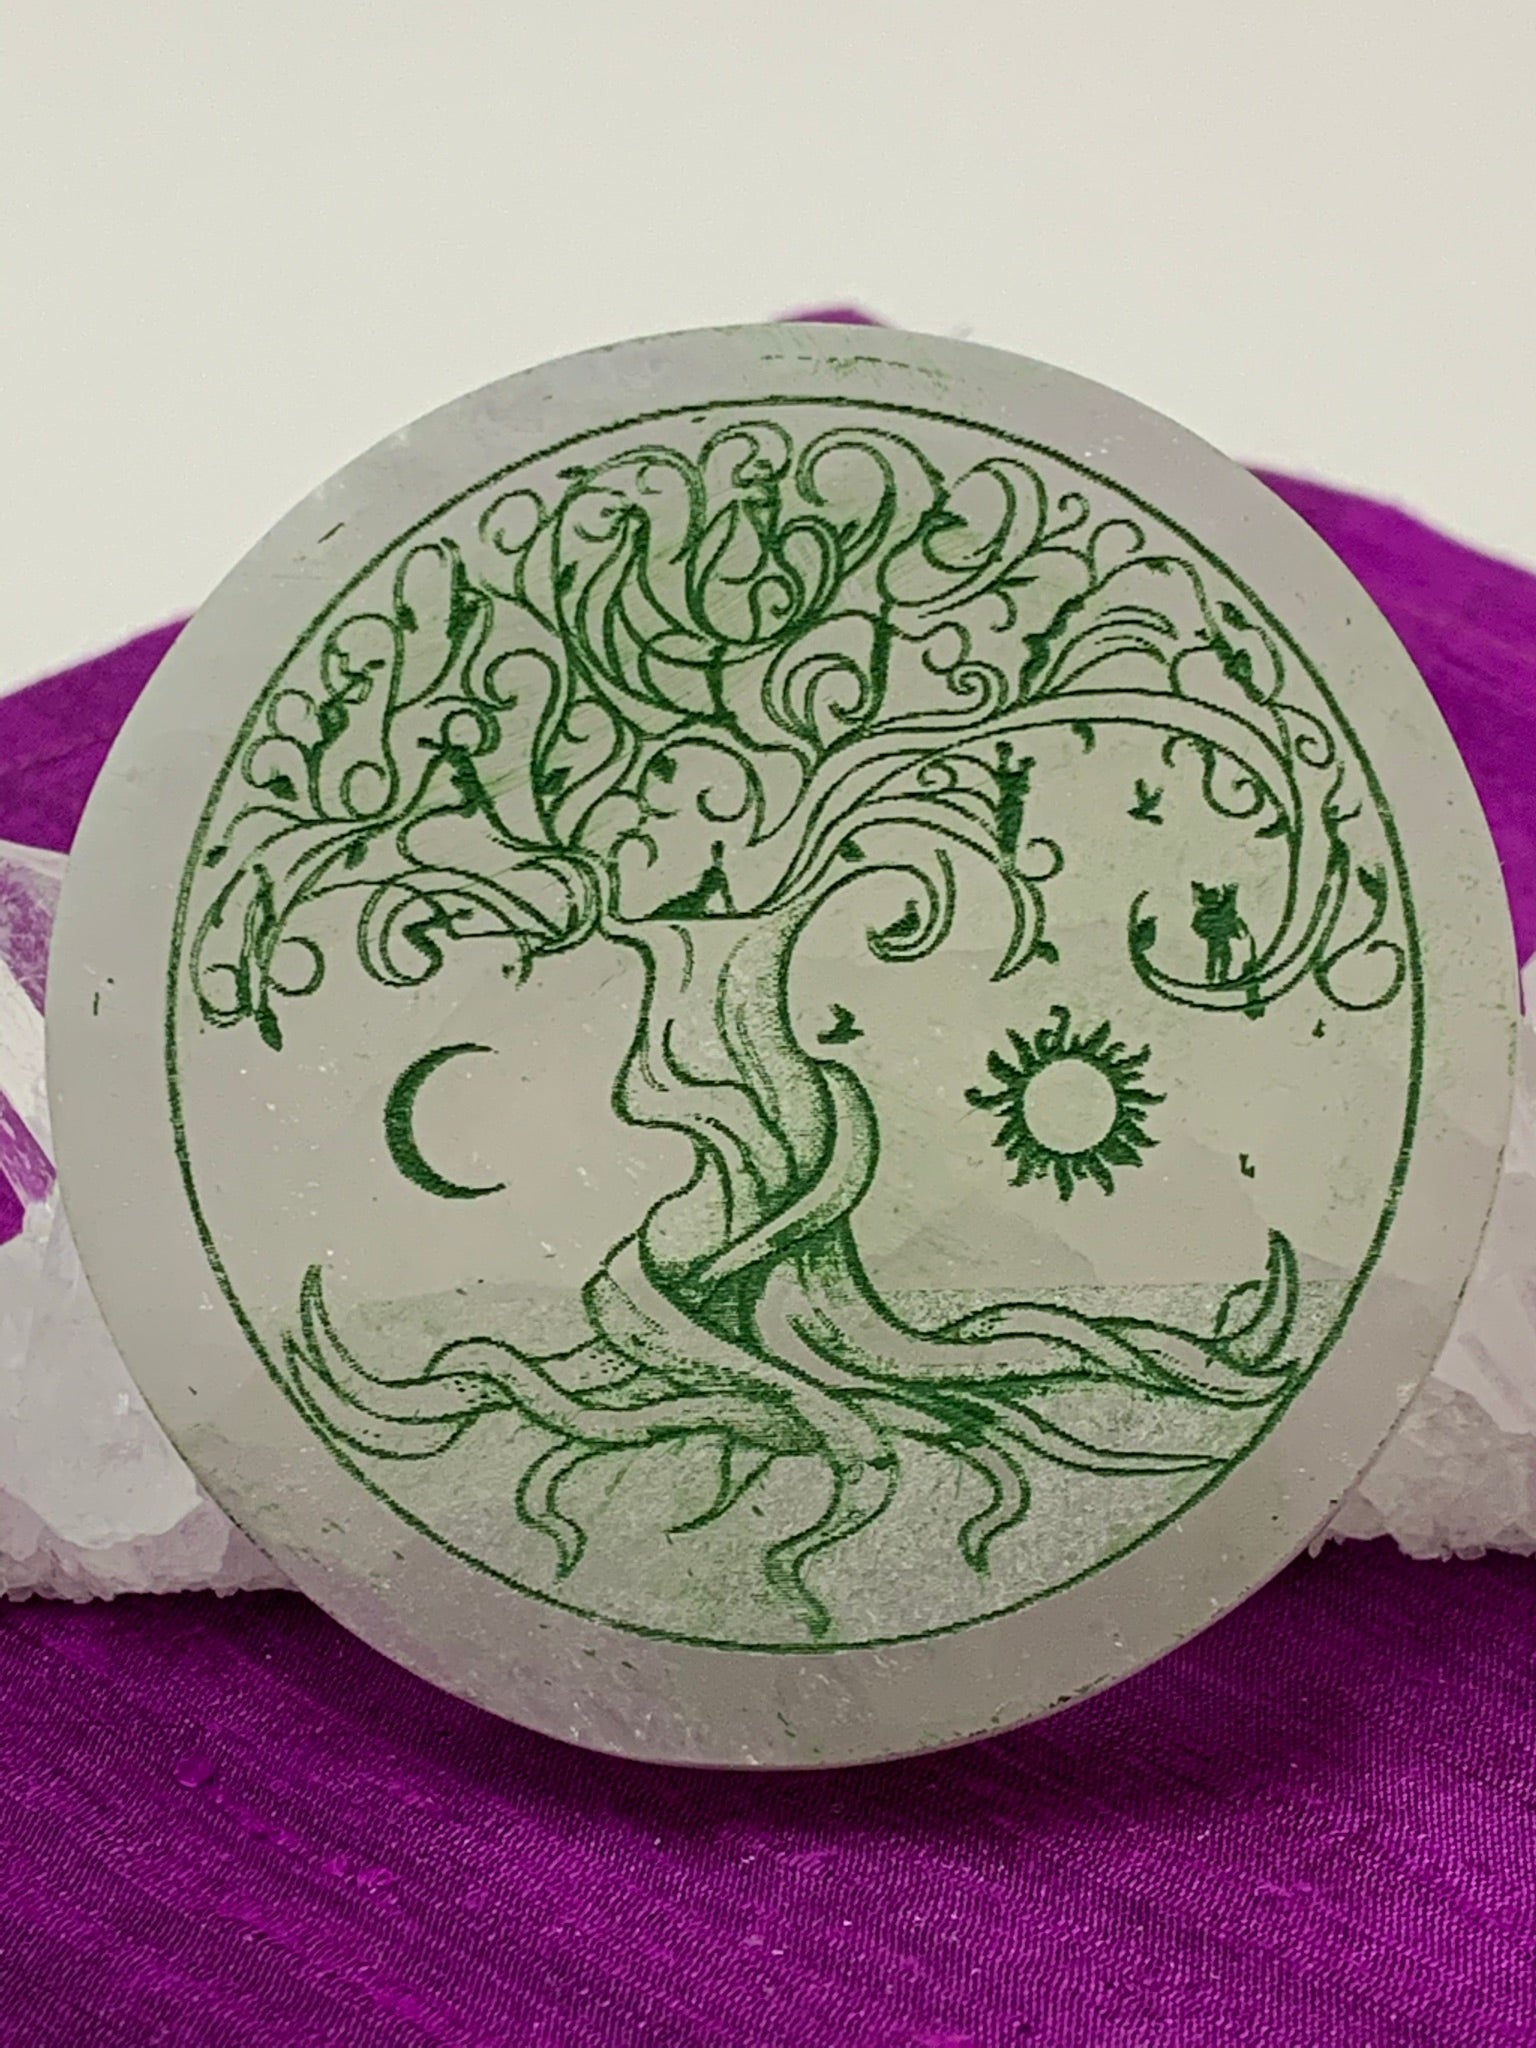 Close-up view of the Celtic Tree of Life etched on smooth, white selenite plate, used for charging your crystals and jewelry (or just for décor). The etched tree is painted green and the selenite plate ranges from translucent to milky white in color. Weight & size vary, but average weight is 4.9 oz, size is approximately 3" in diameter and approximately ½" thick. The selenite is ethically sourced and workers are paid living wages.